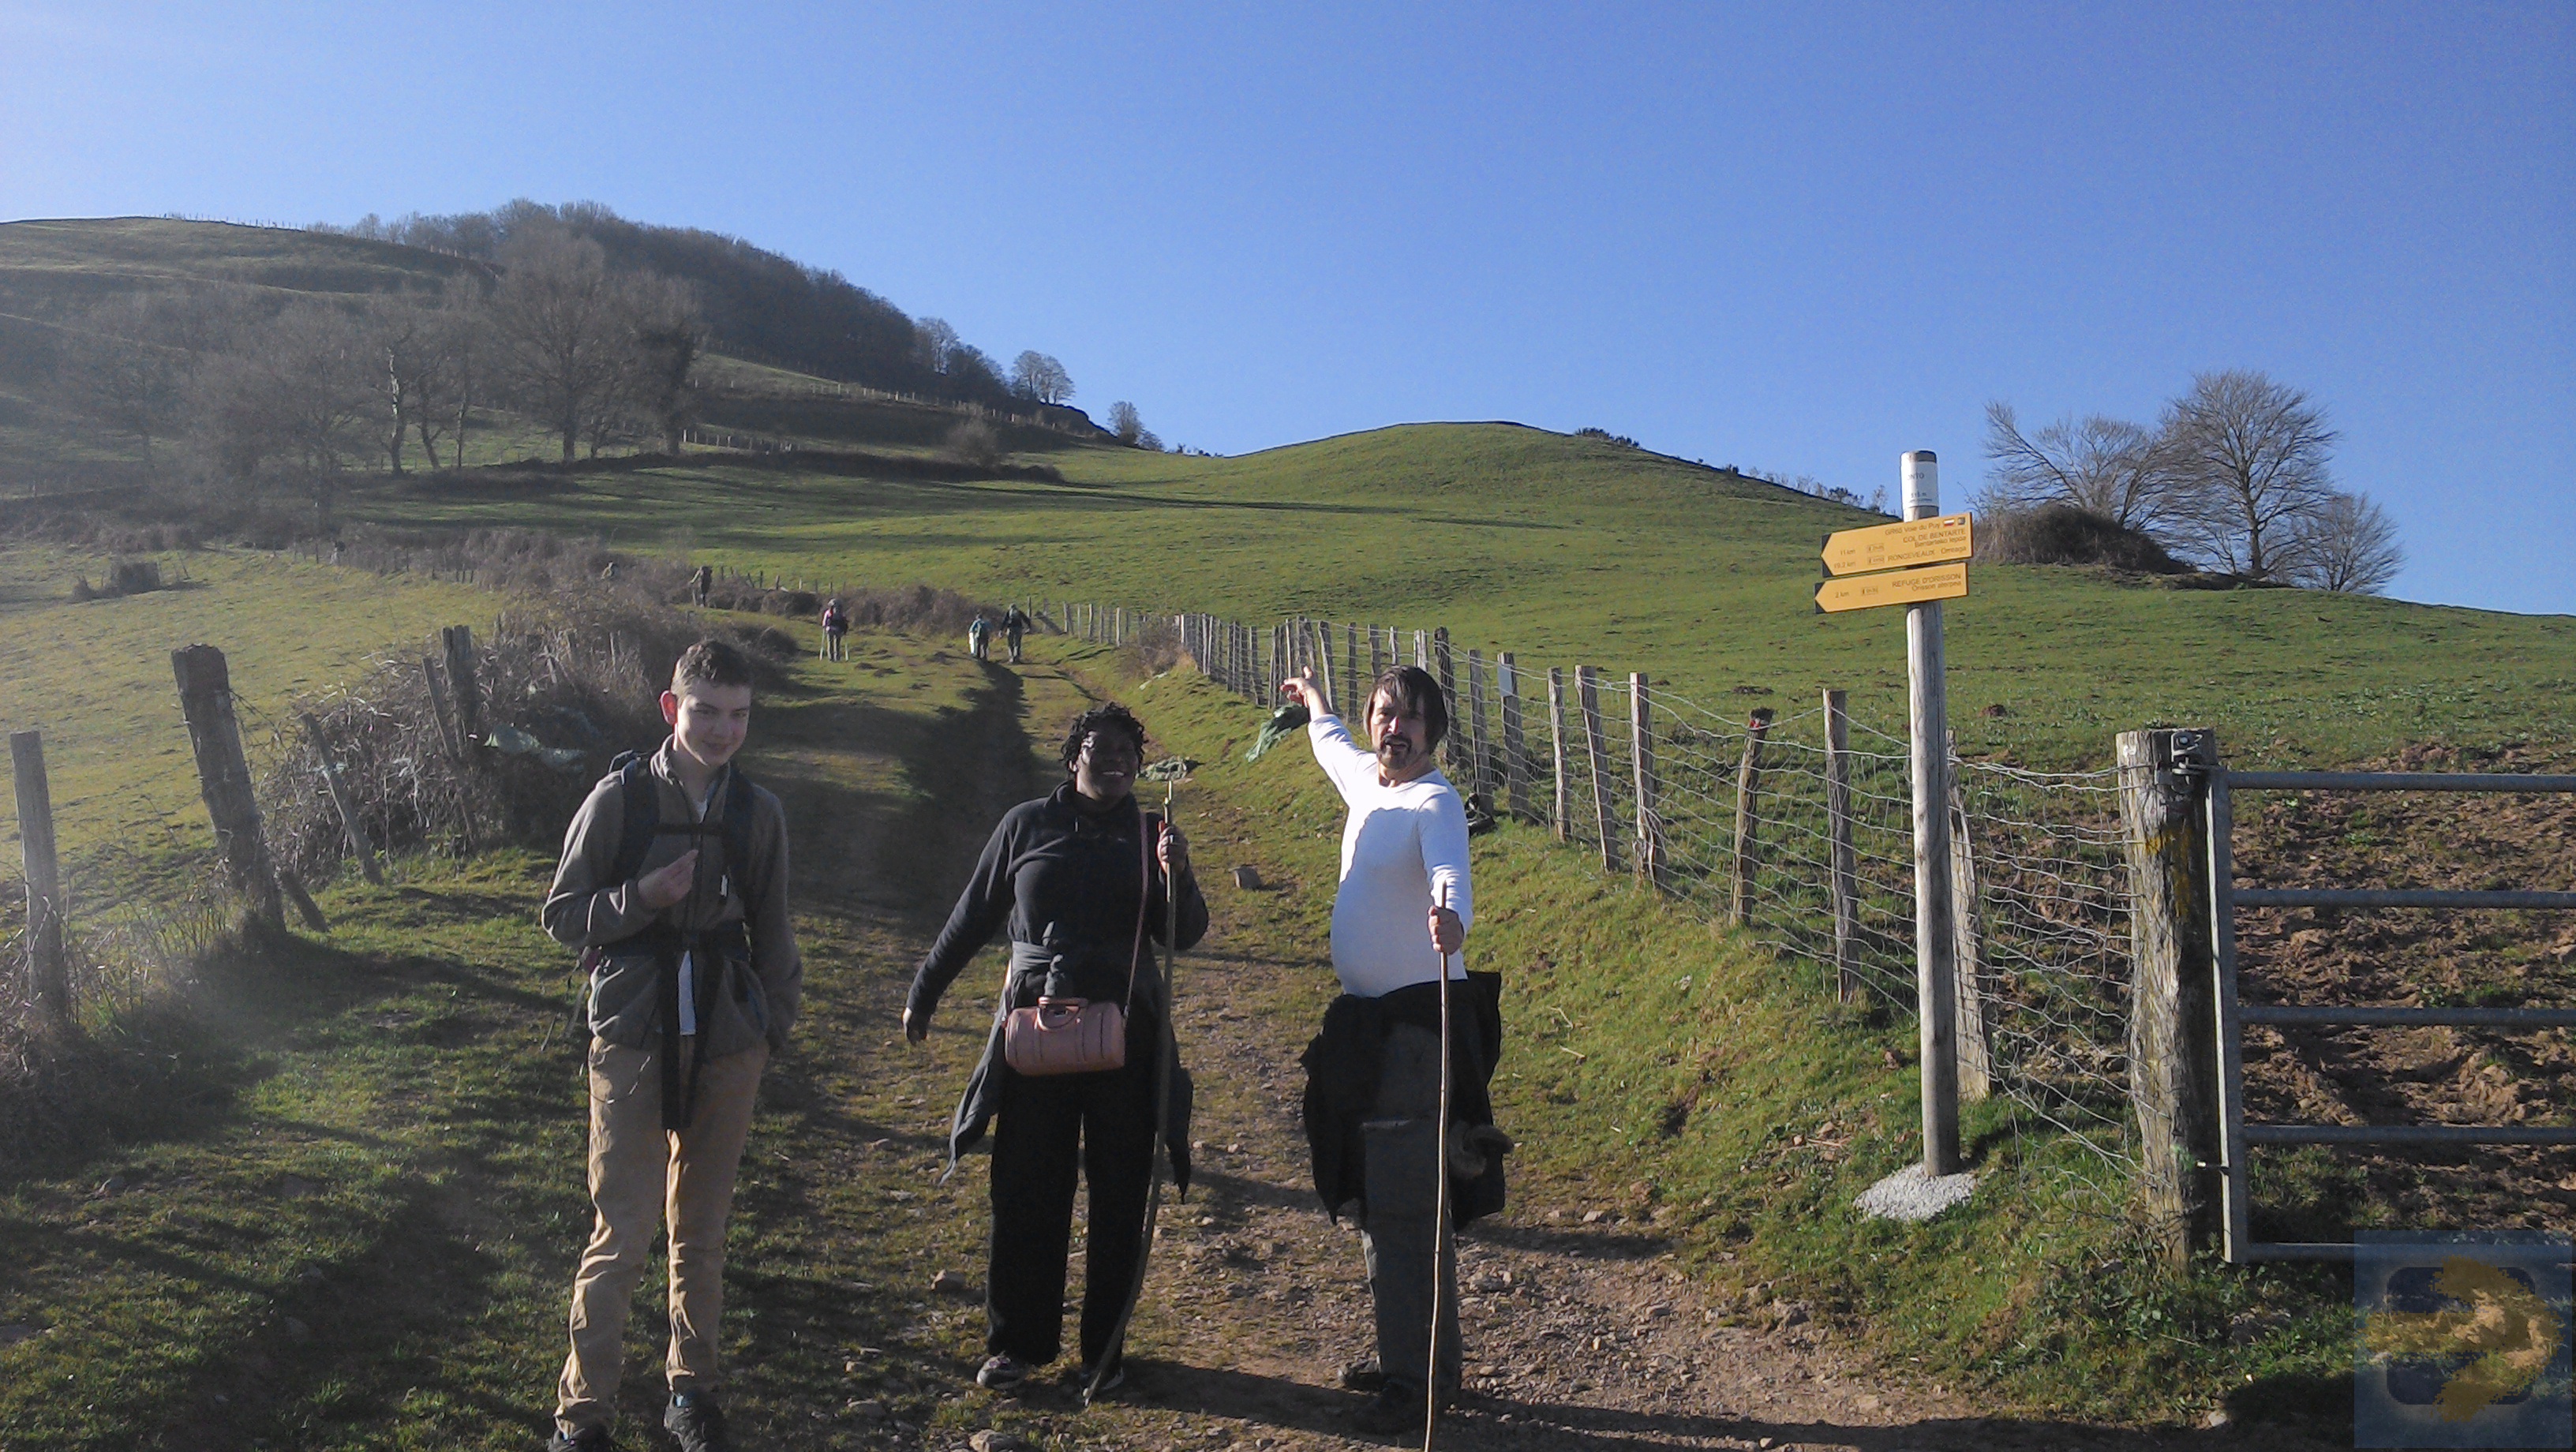 08/04/2015 Huntto to Roncesvalles